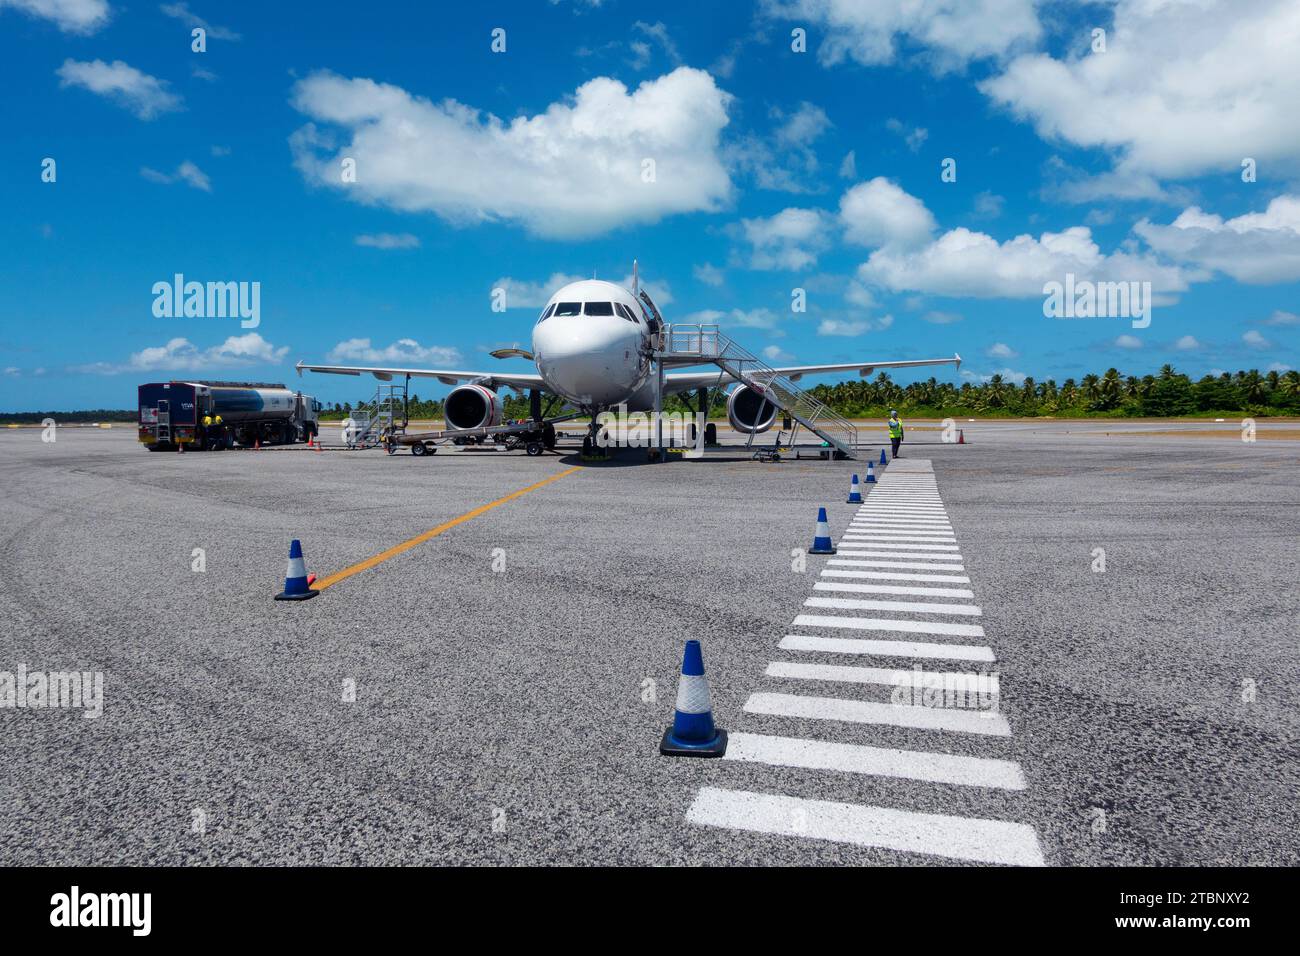 View of a Virgin Australia Airbus A320 airliner at Cocos (Keeling ...